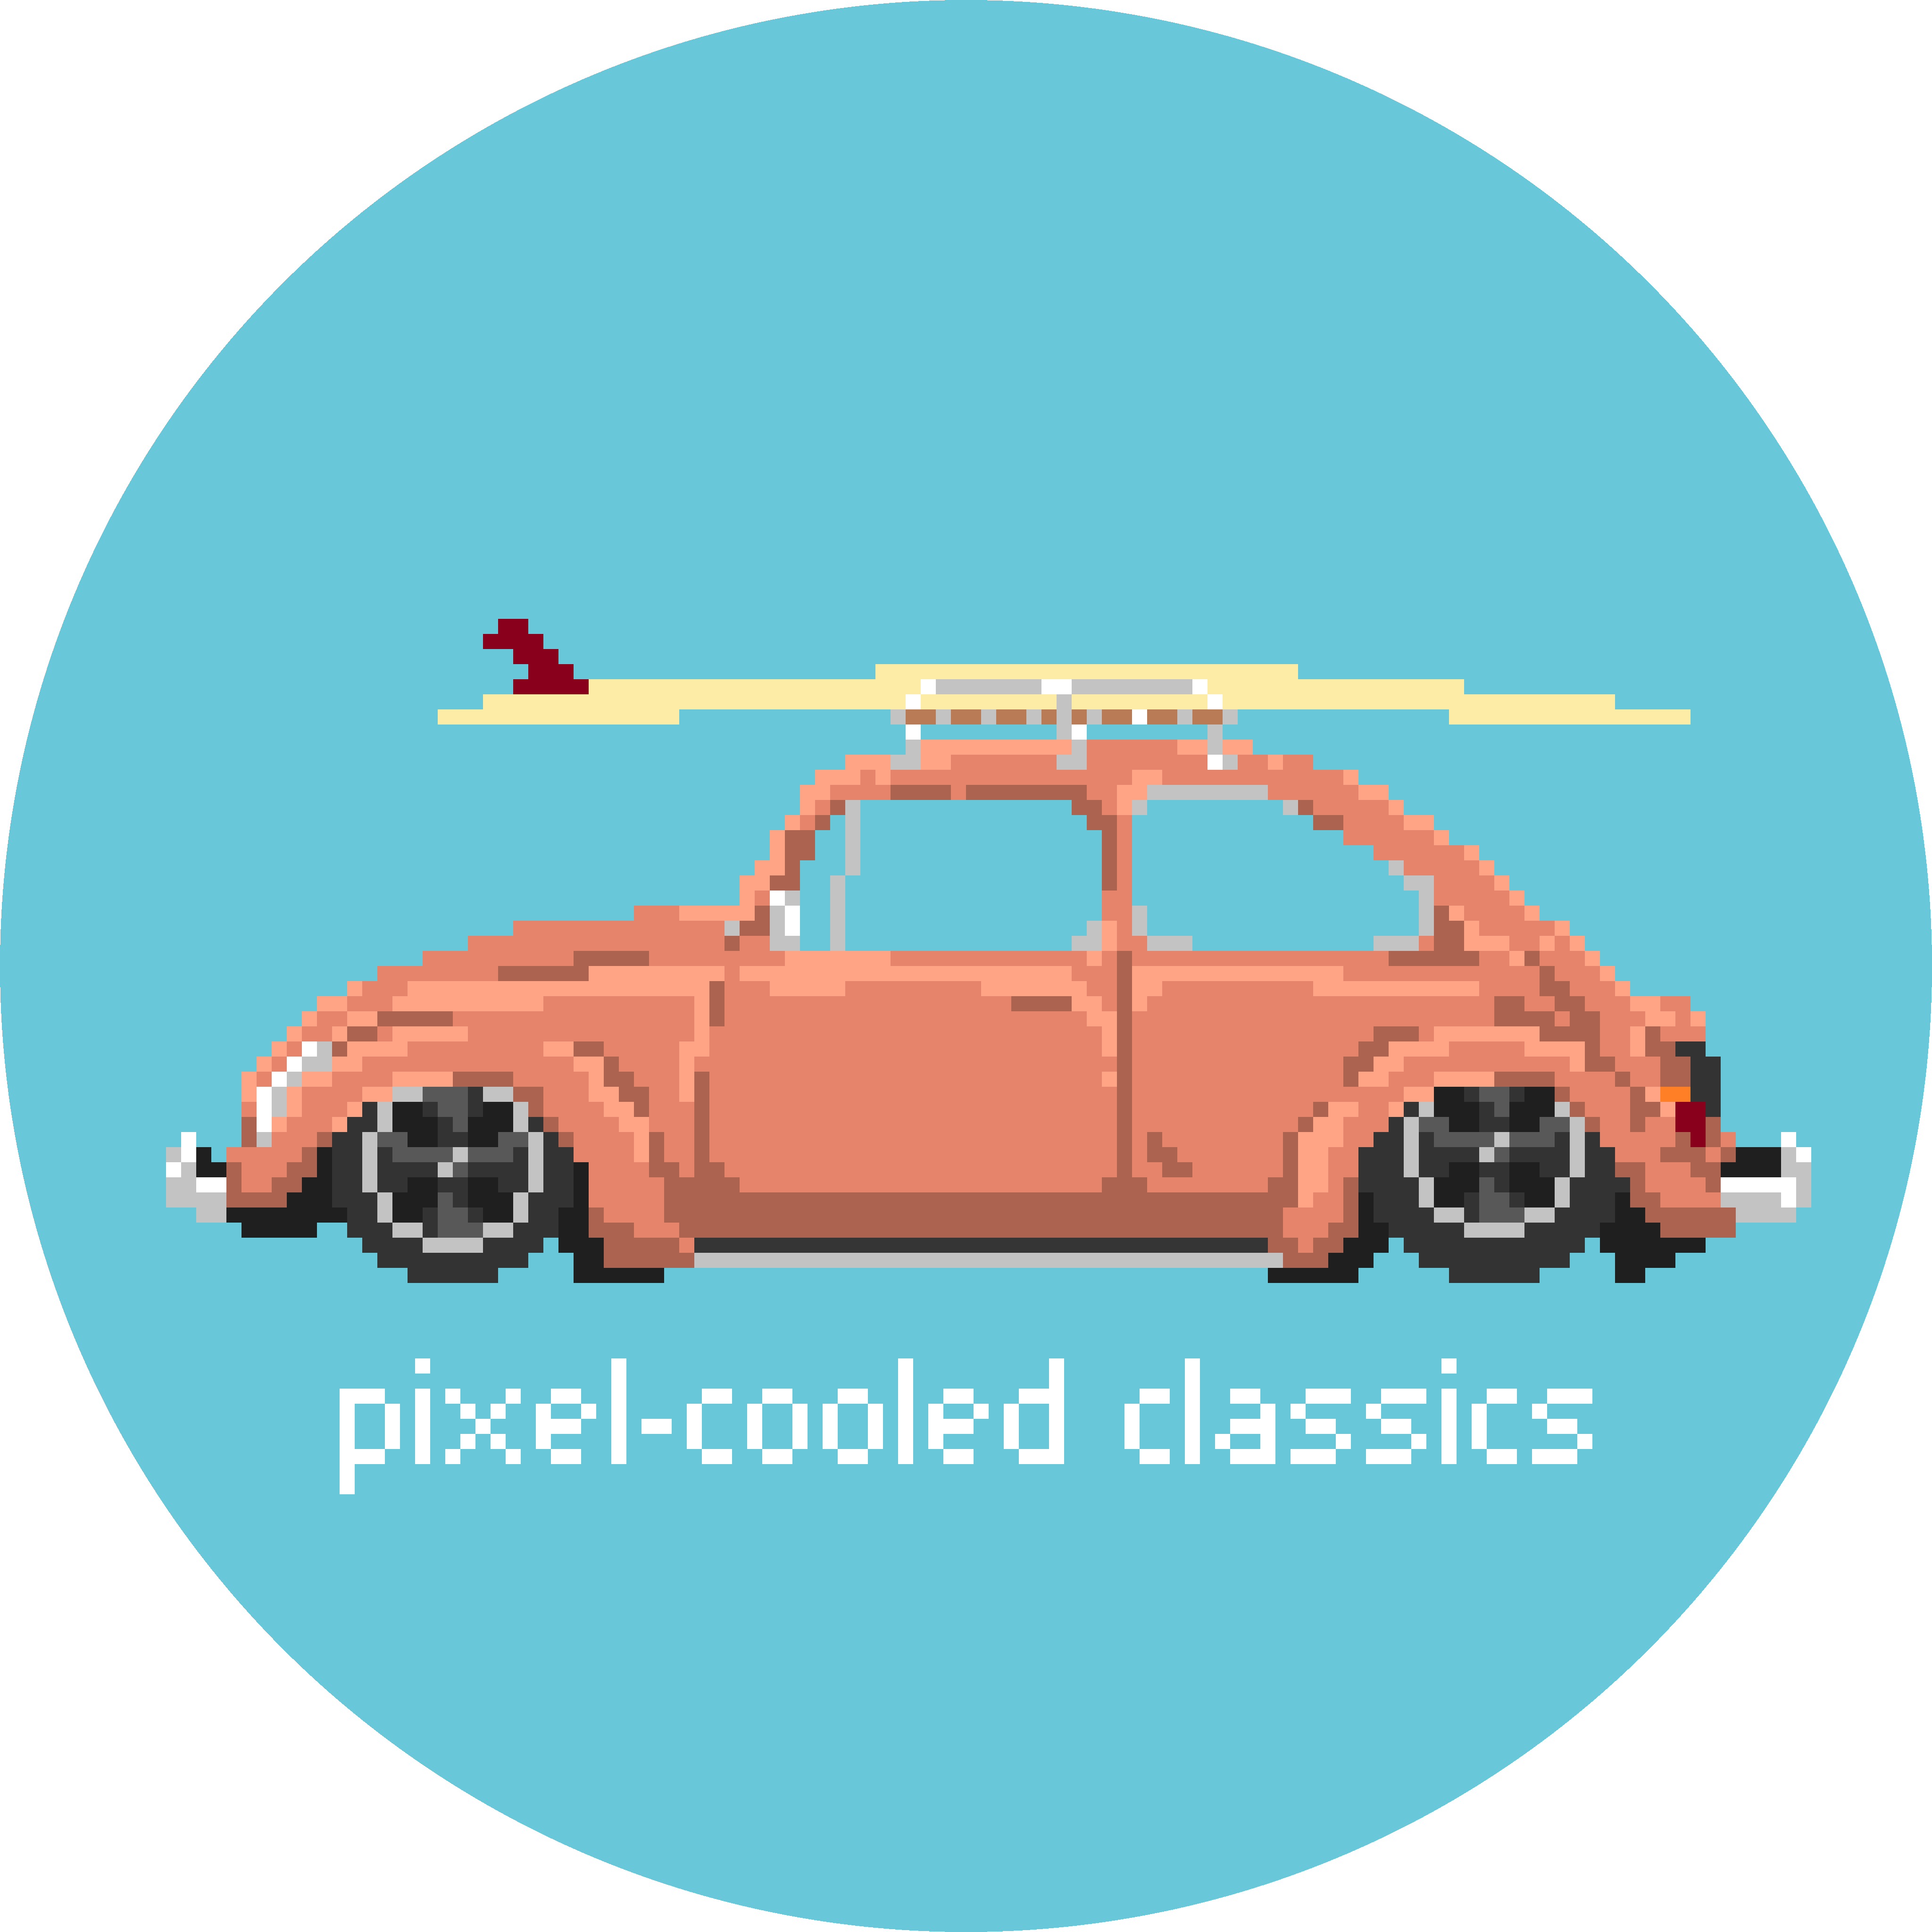 The first pixel-cooled classic